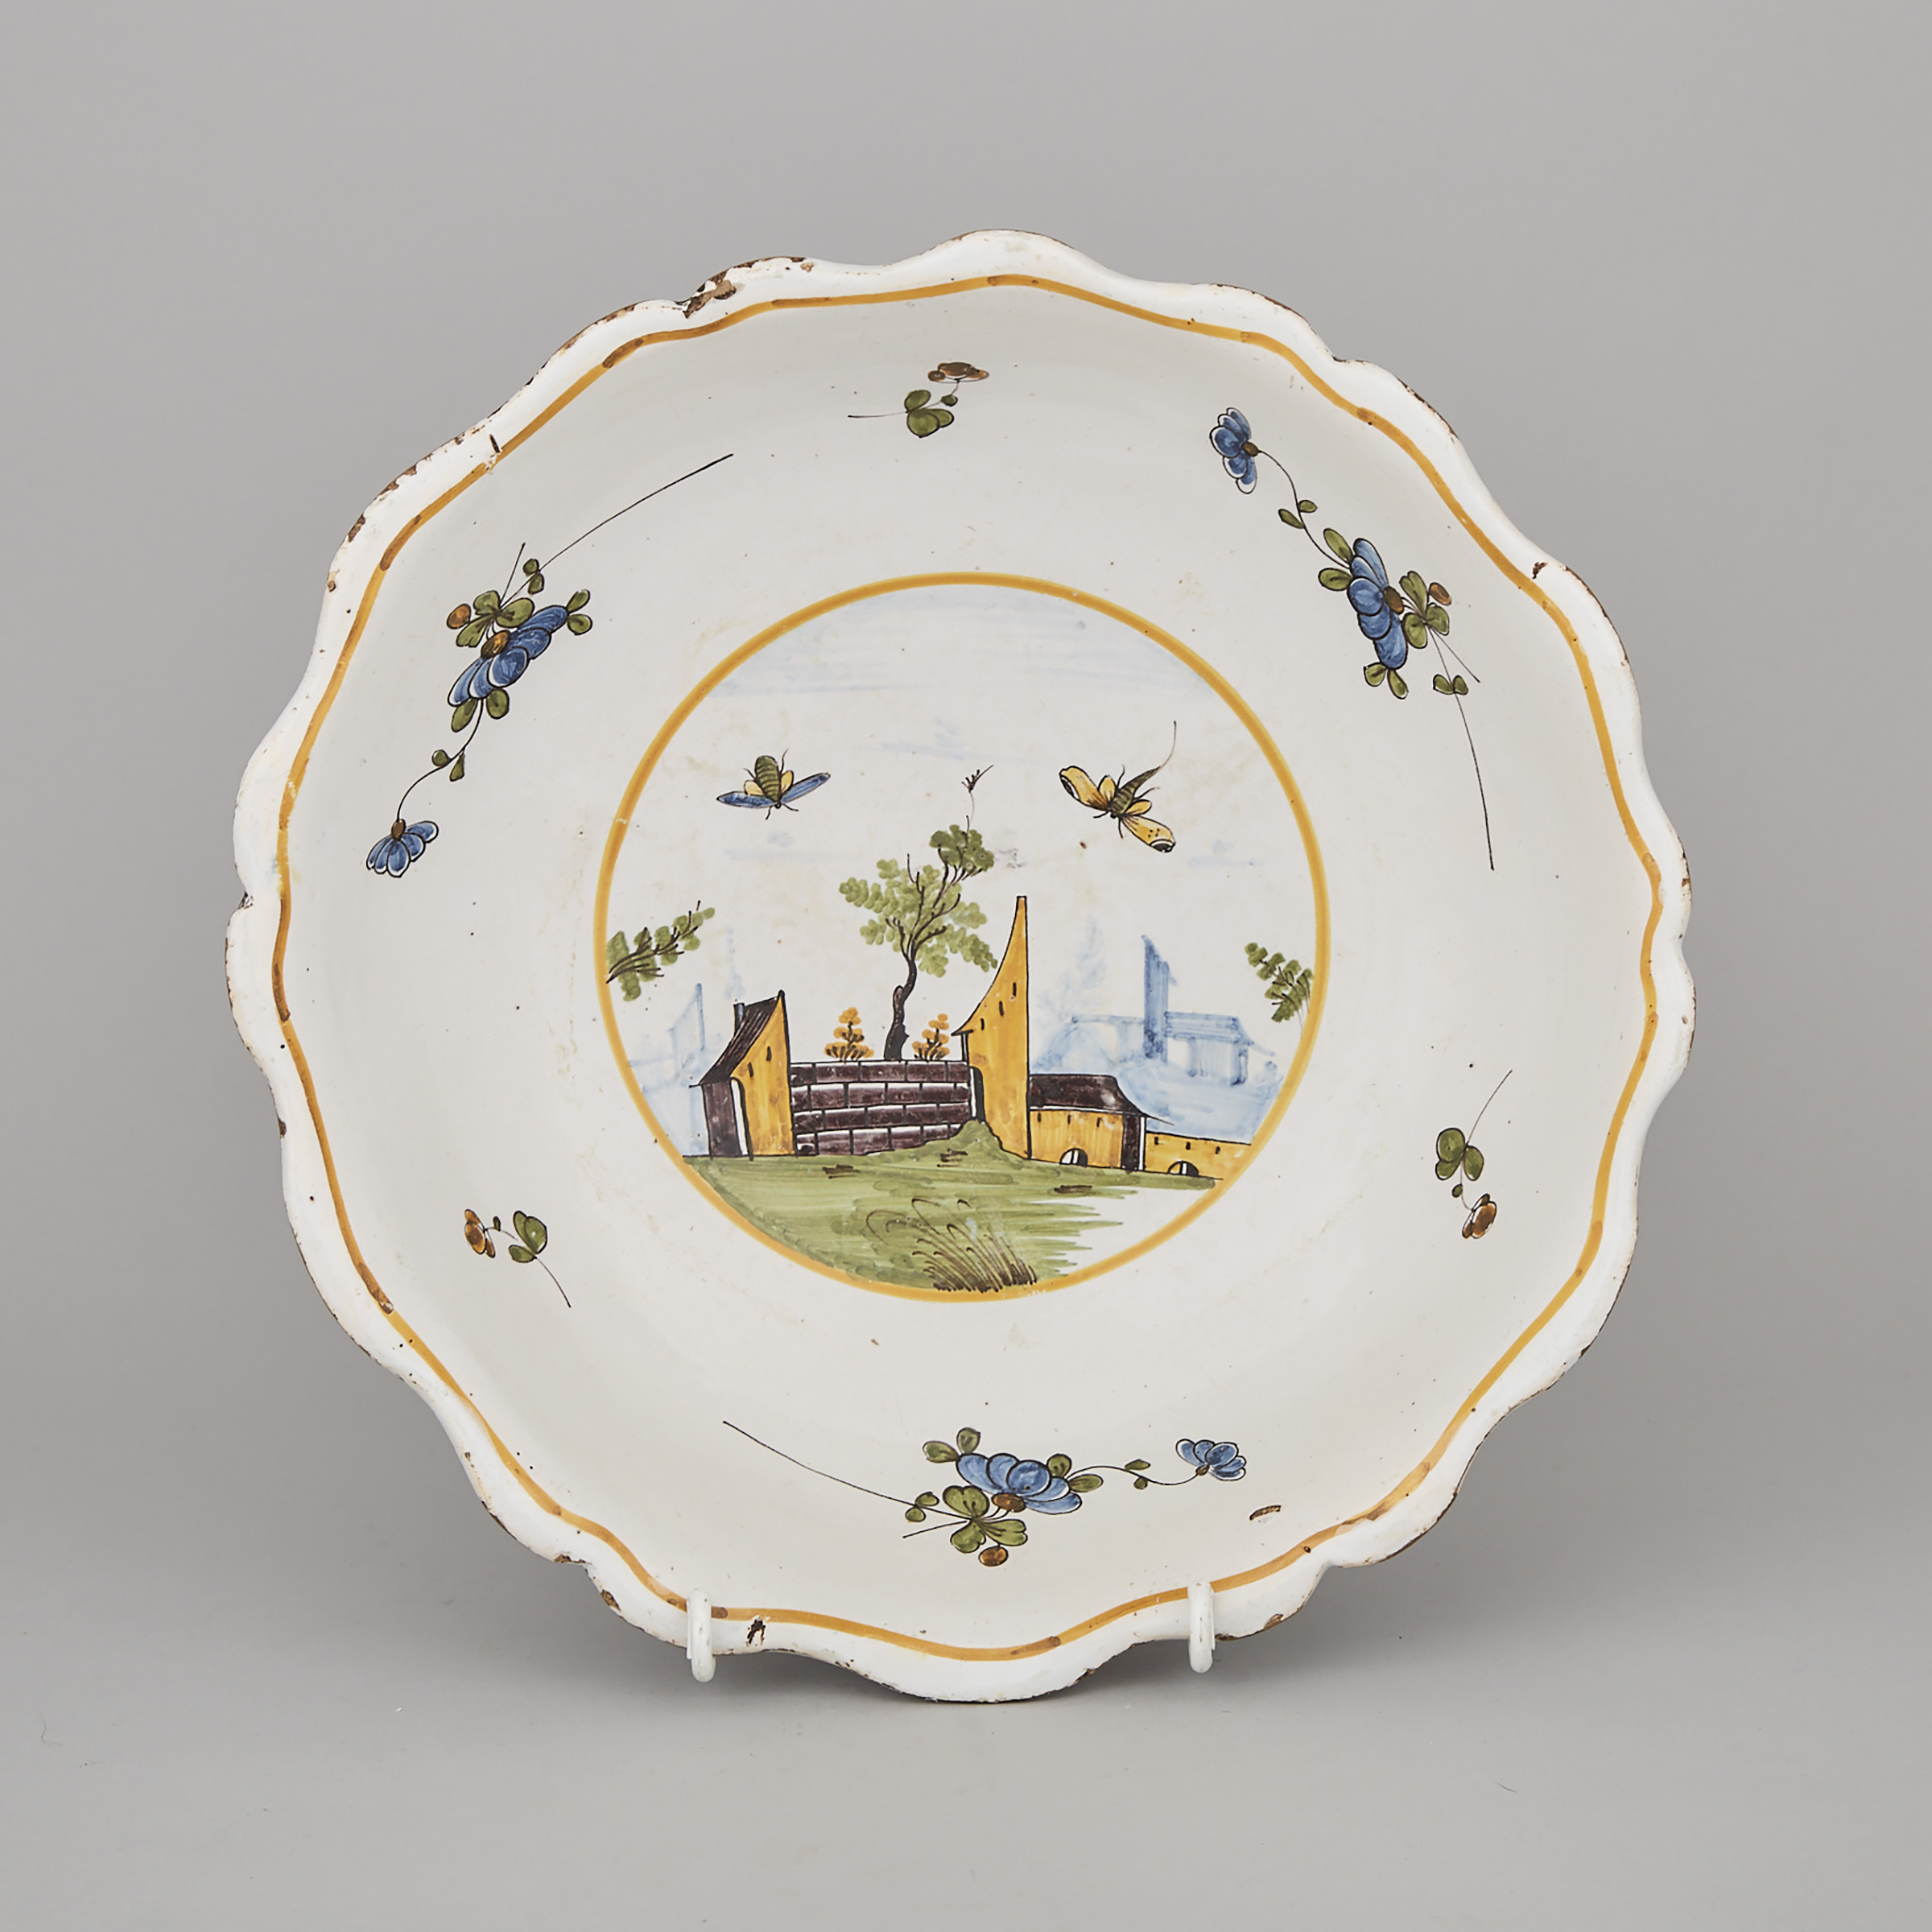 French Faience Polychrome Basin, late 18th/early 19th century